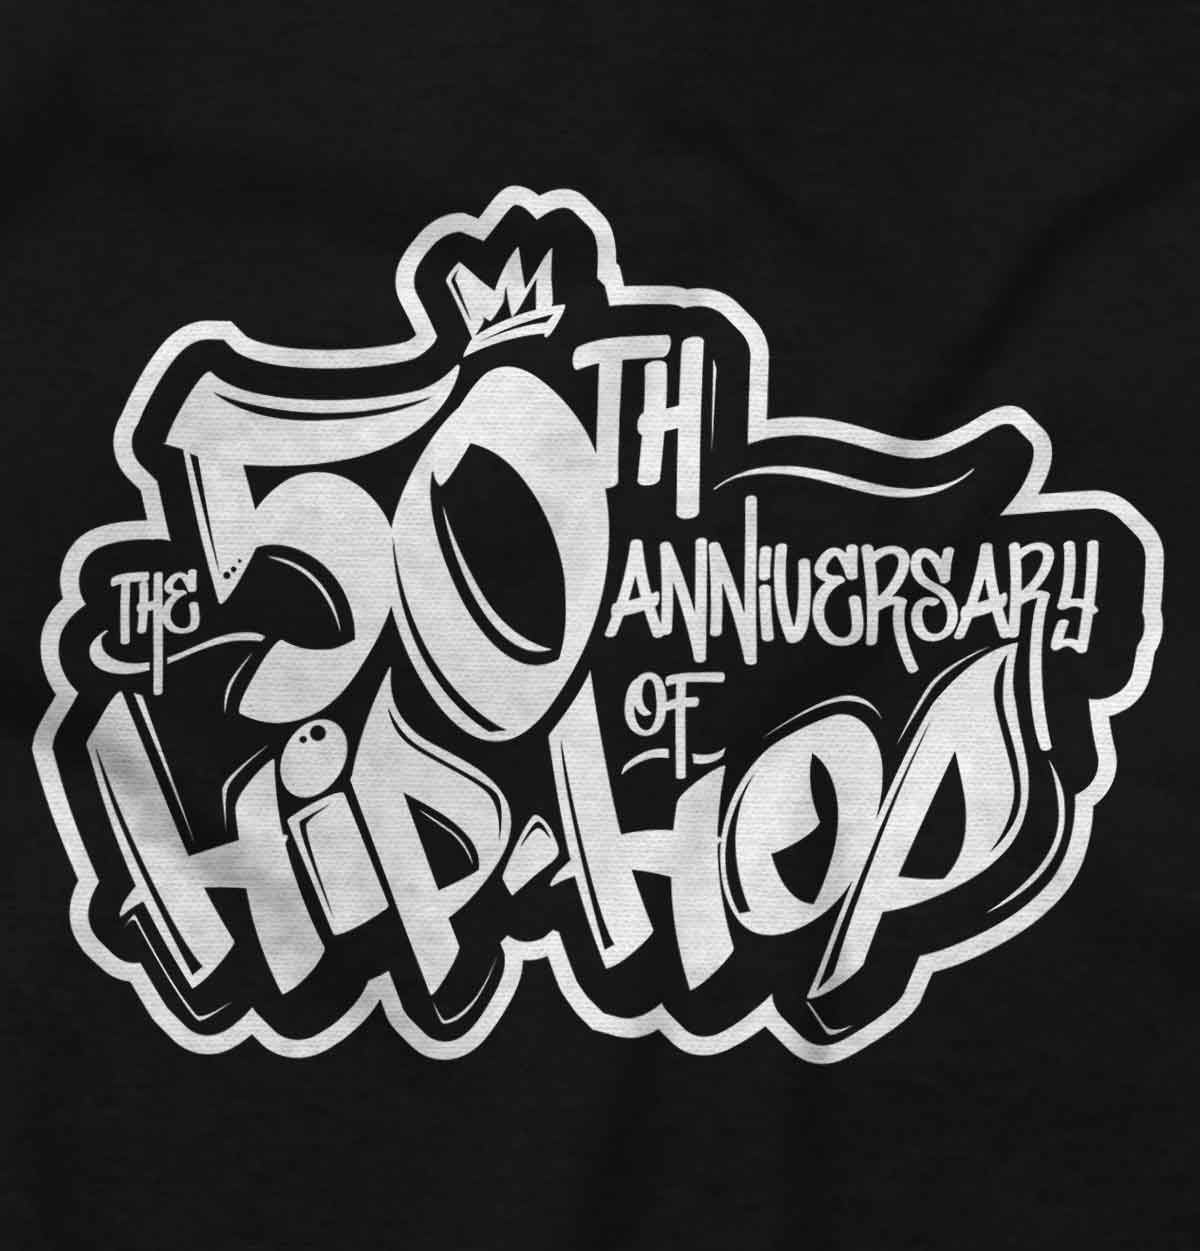 This image represents the Rhyme Syndicate, a significant part of hip-hop history. It symbolizes unity, creativity, and the powerful rhythm of the movement.